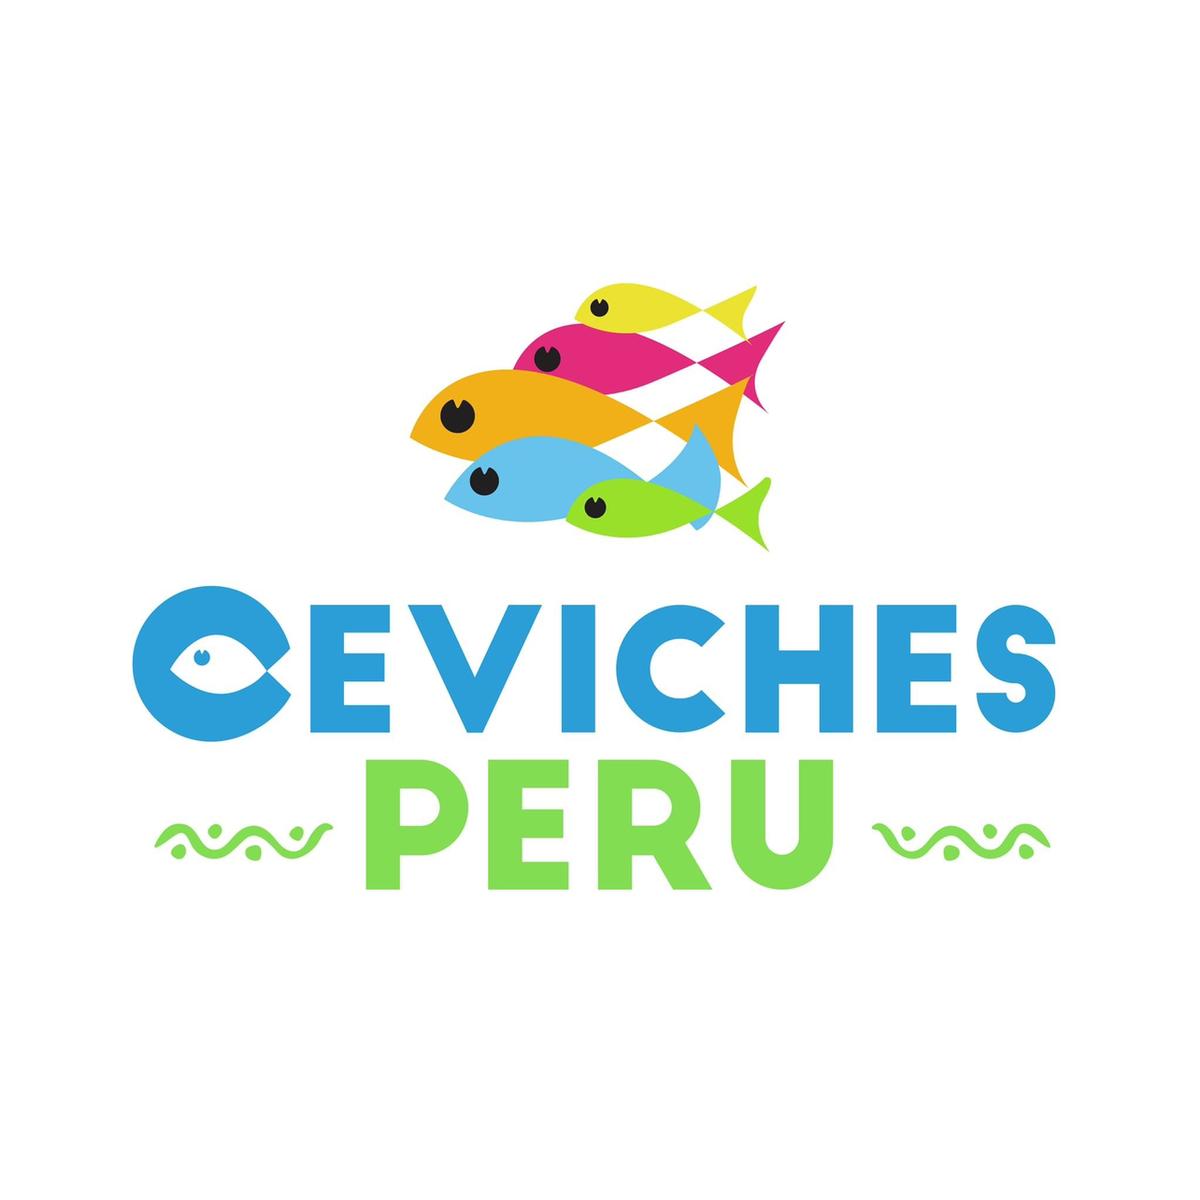 Ceviches Peru's images